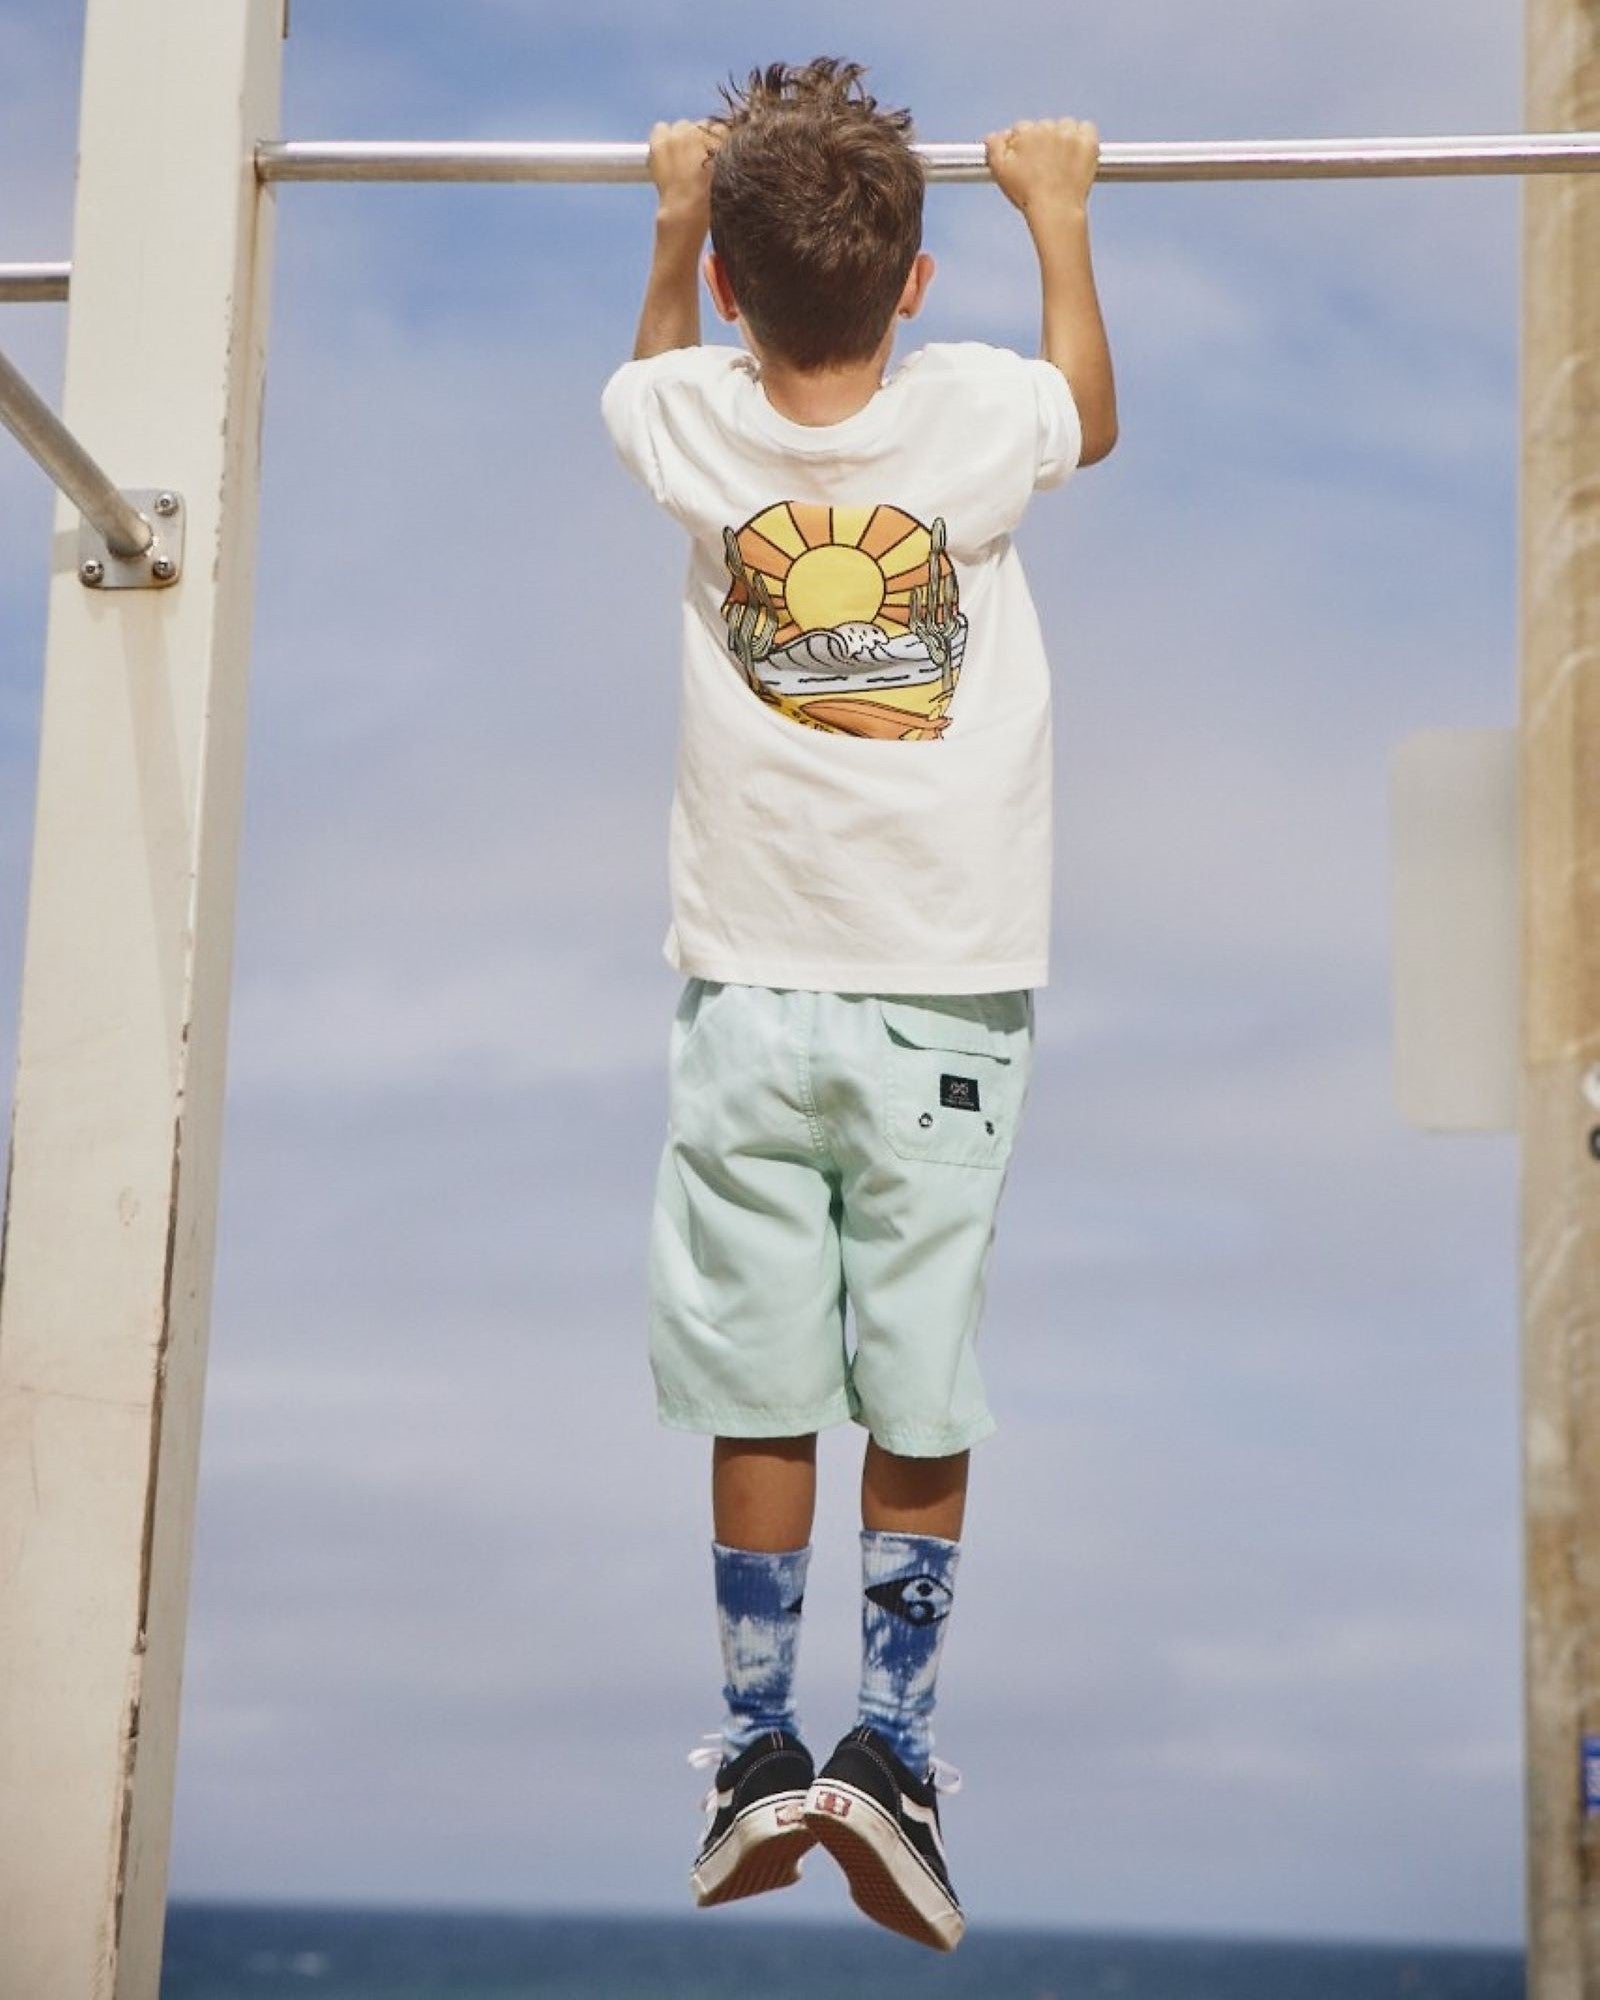 Alphabet Soup's Teen Go To Beach Shorts in mint green for boys aged 8-16. Featuring elasticated waist, adjustable drawcord, 2 mesh-lined pockets & back pocket, velcro-fastening, quick-drying & non-stretch fabric.